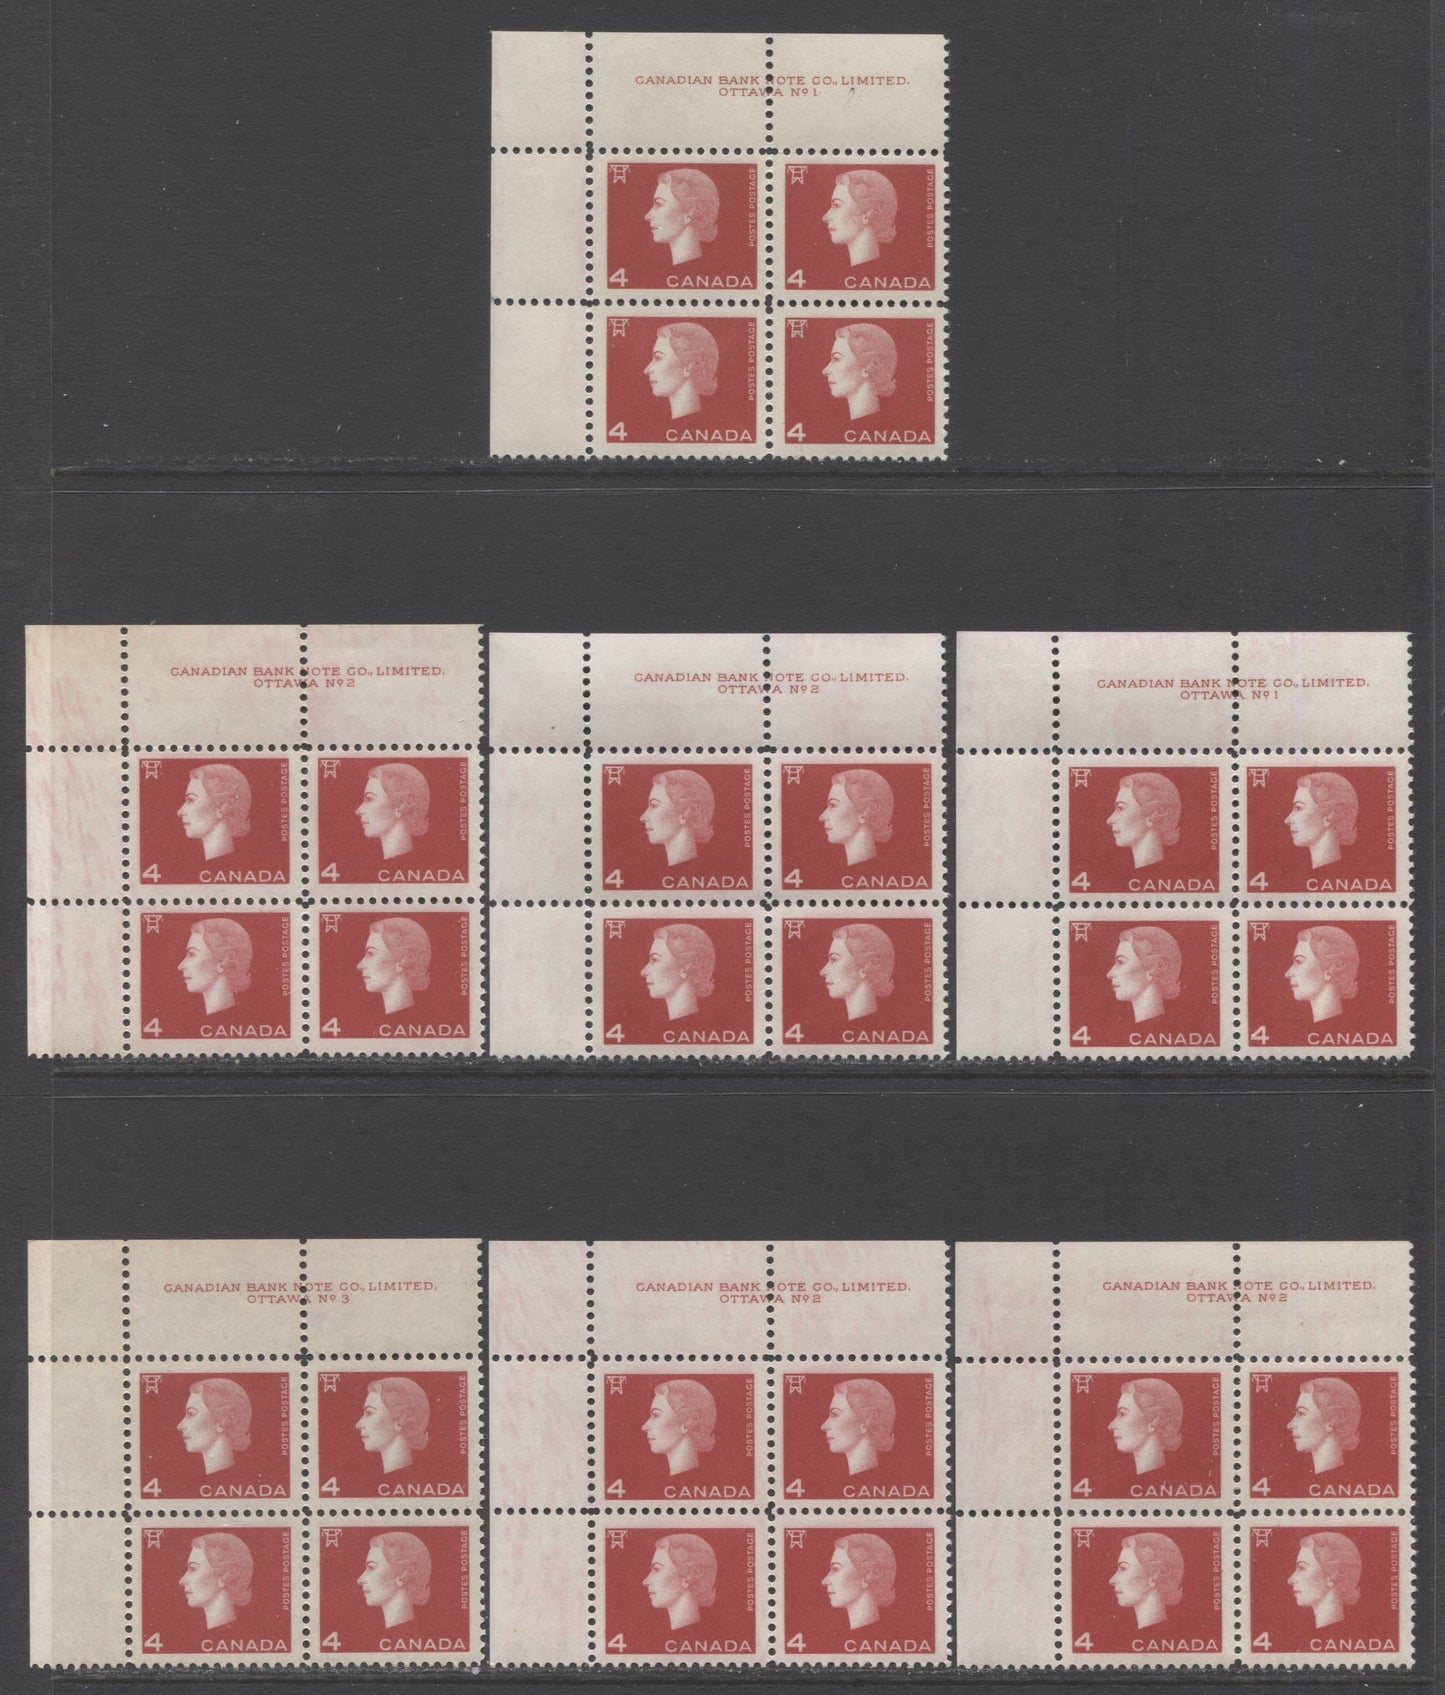 Lot 108 Canada #404 4c Carmine Electricity, 1962-1963 Cameo Issue, 16 VFNH UL Plates 1-5 Blocks Of 4 With Shade & Gum Varieties